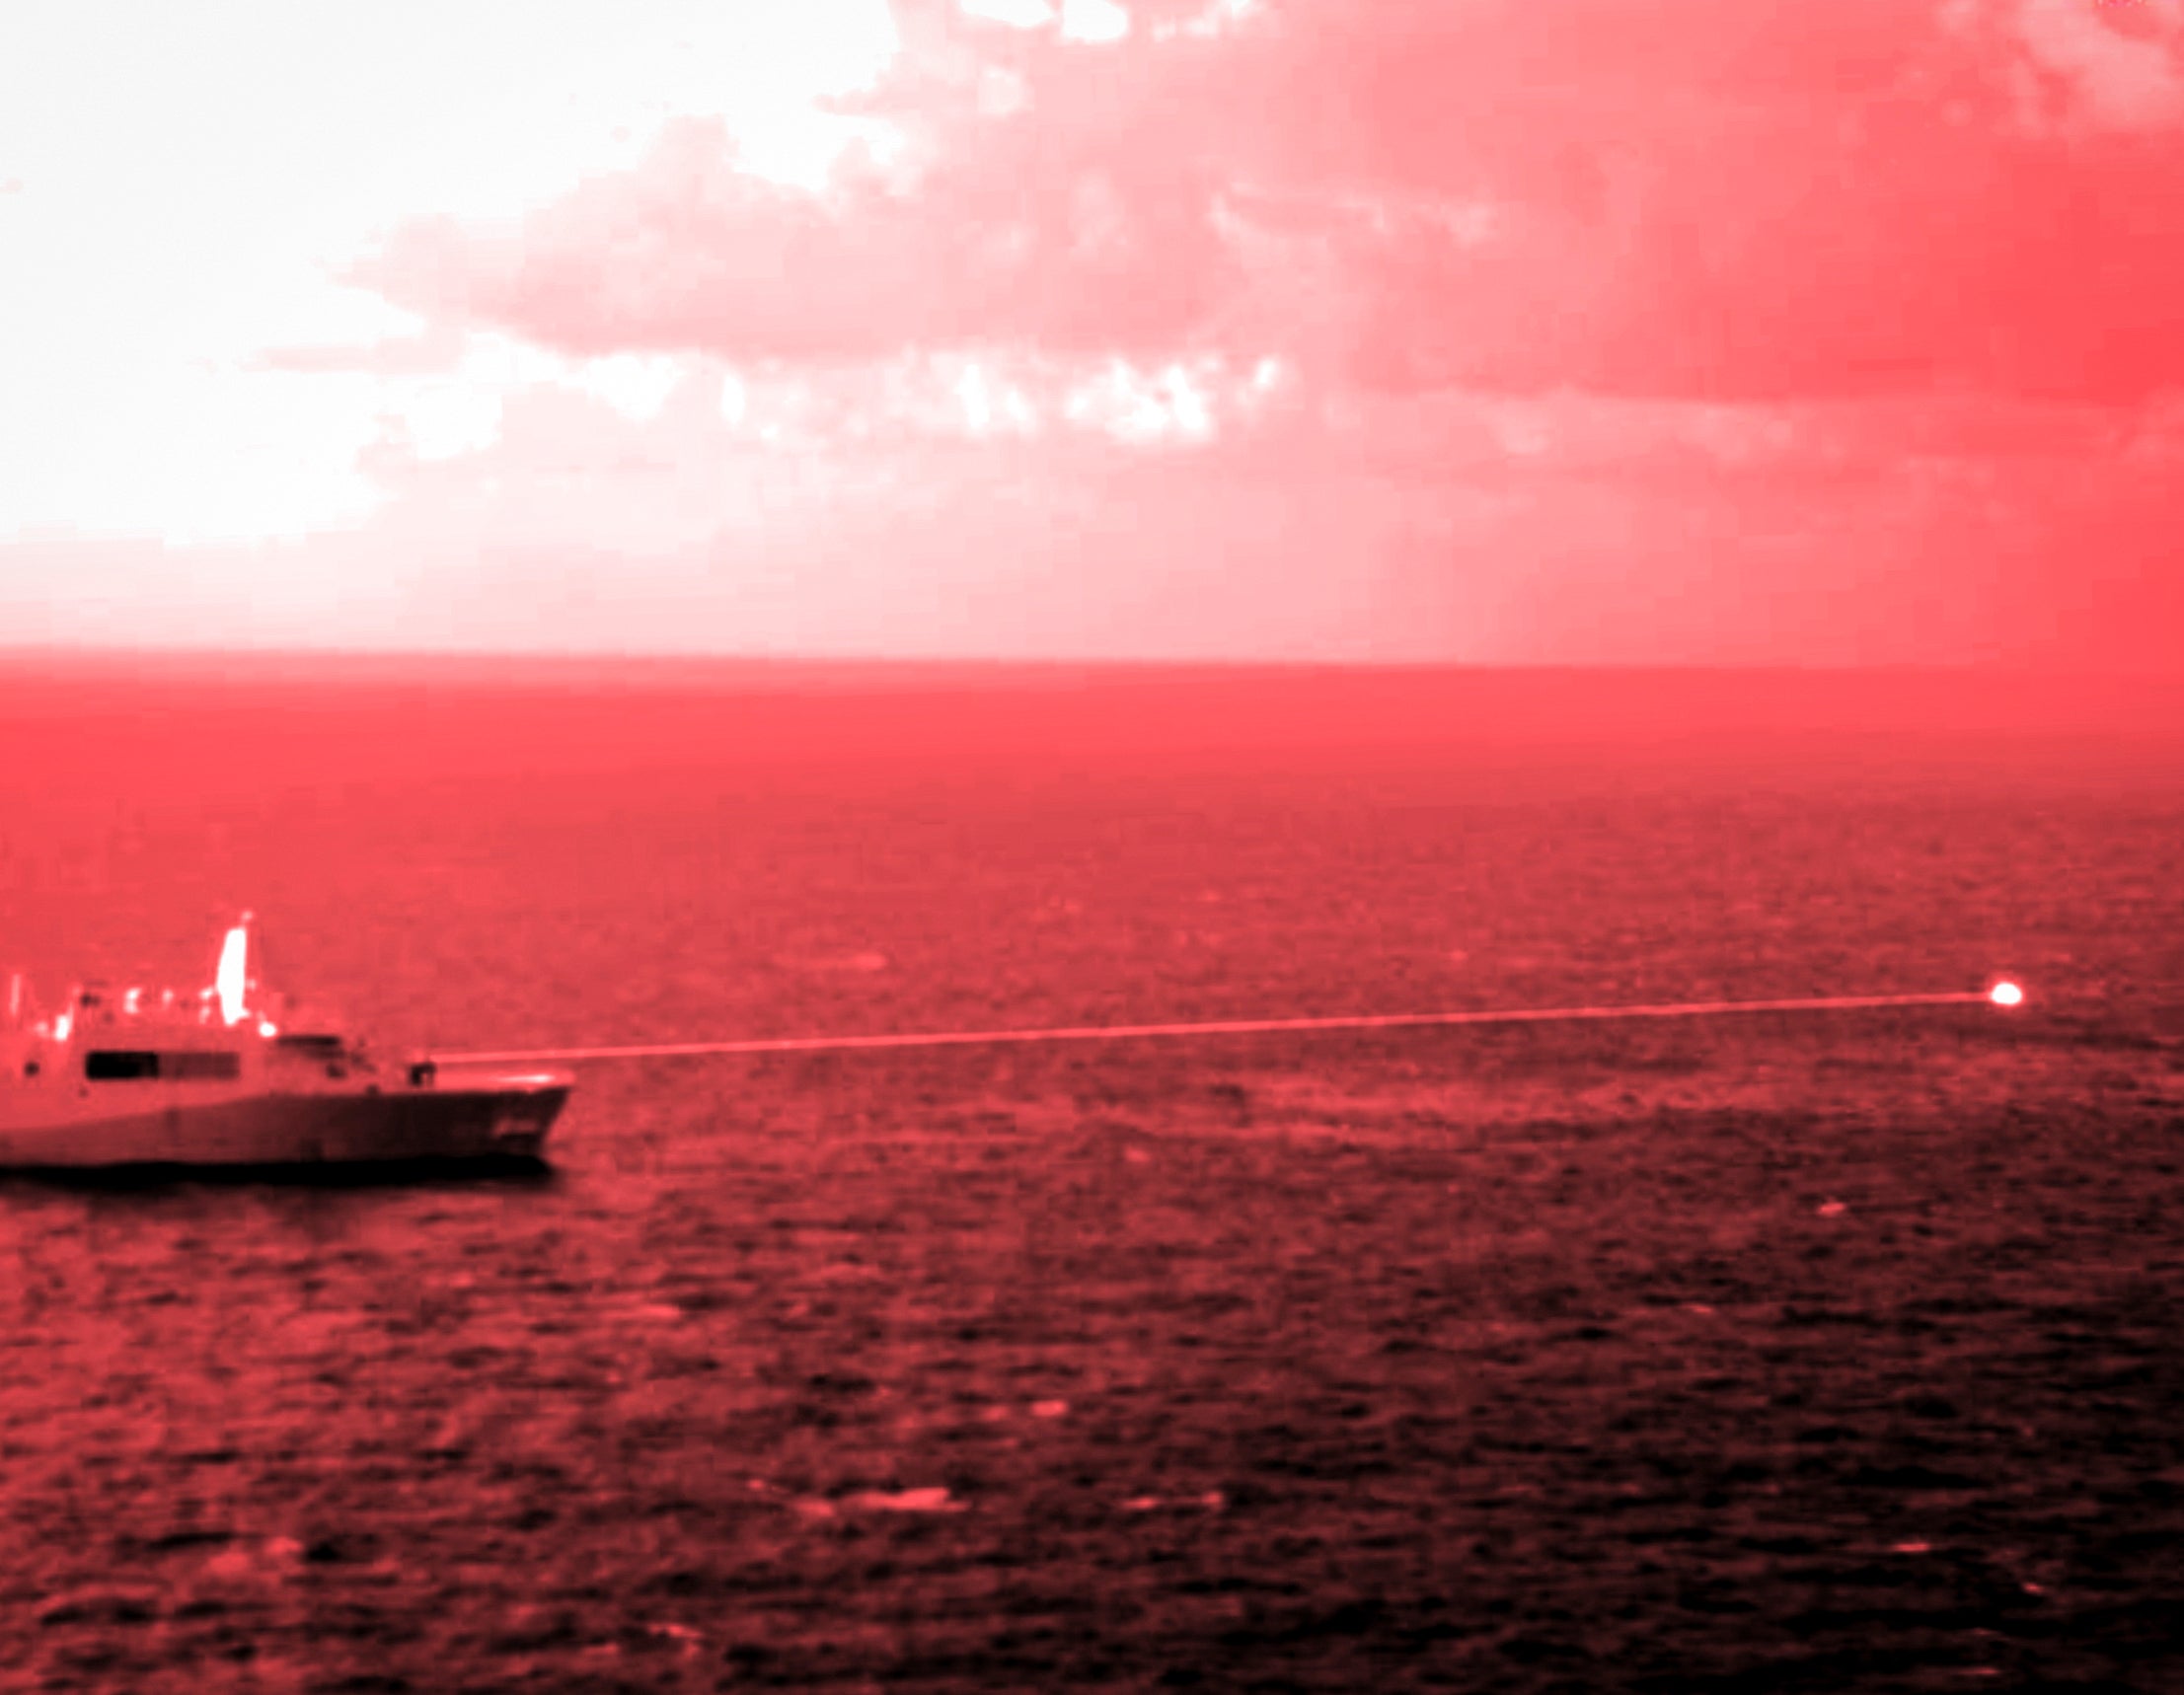 In this handout infrared photo from the U.S. Marine Corps, the USS Portland fires a laser weapon system at a target floating in the Gulf of Aden on Tuesday, Dec. 14, 2021. The U.S. Navy announced Wednesday it tested a laser weapon and destroyed a floating target in the Mideast, a system that could be used to counter bomb-laden drone boats deployed by Yemen's Houthi rebels in the Red Sea.